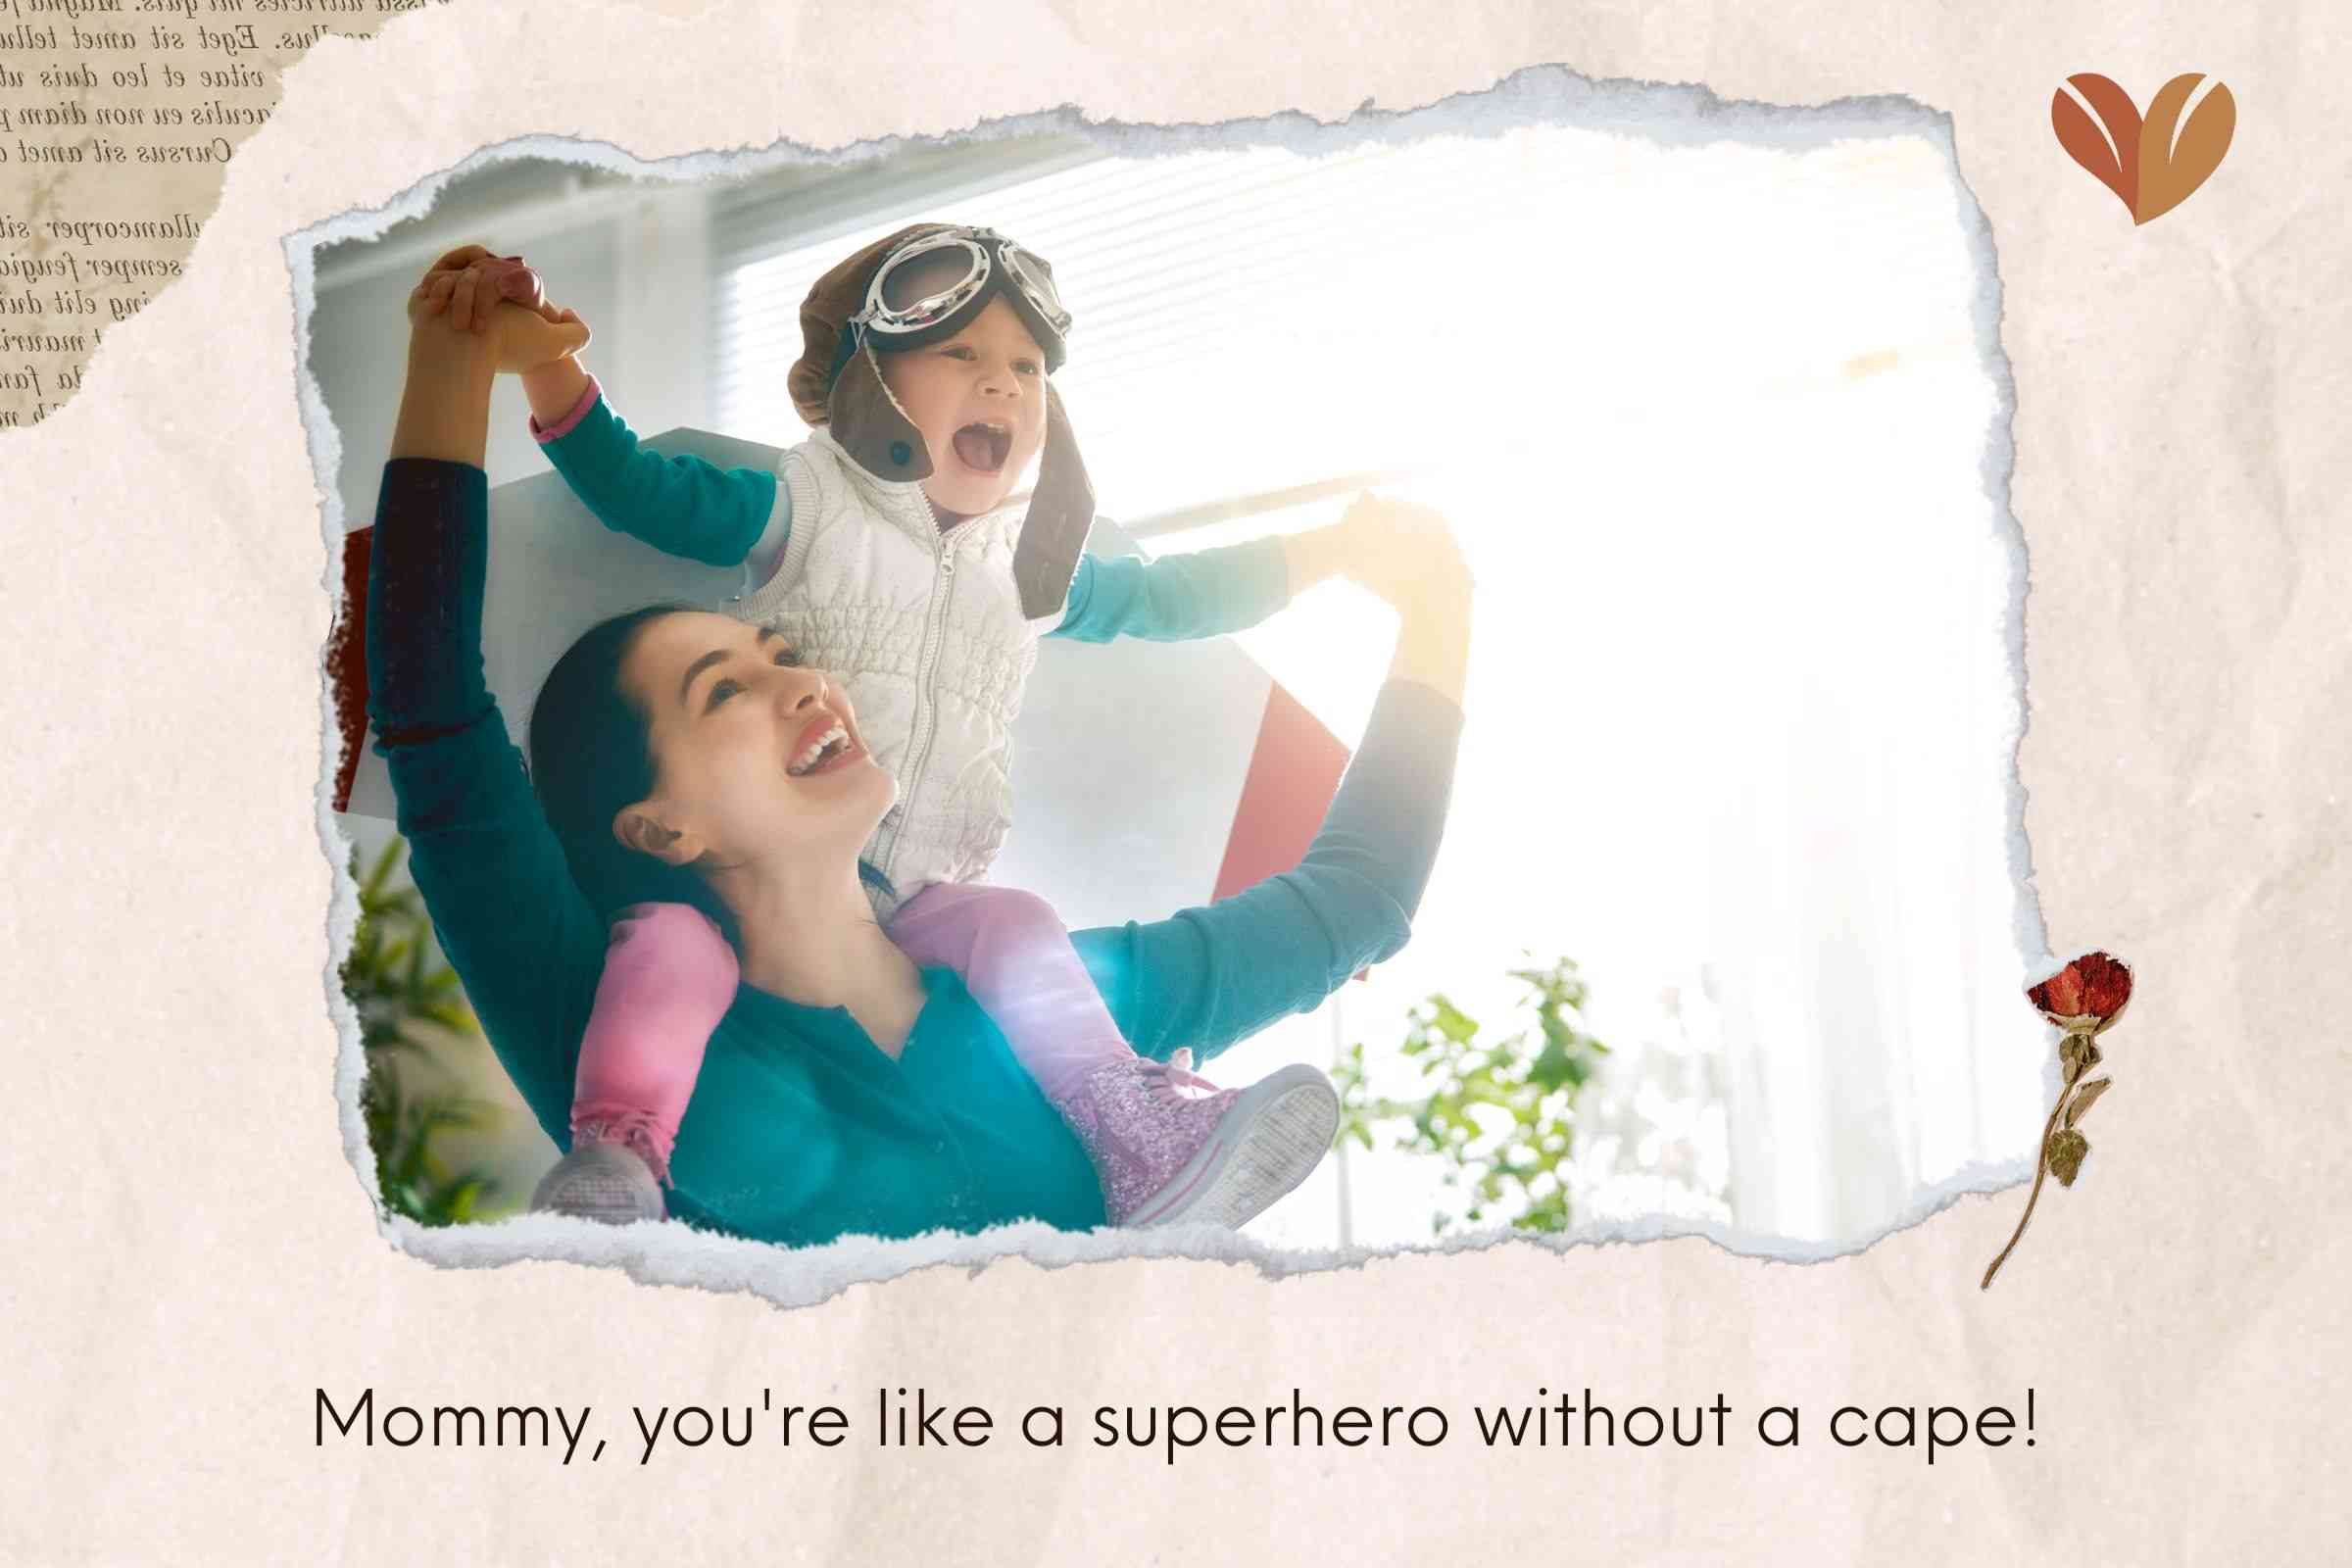 Mommy, you're like a superhero without a cape